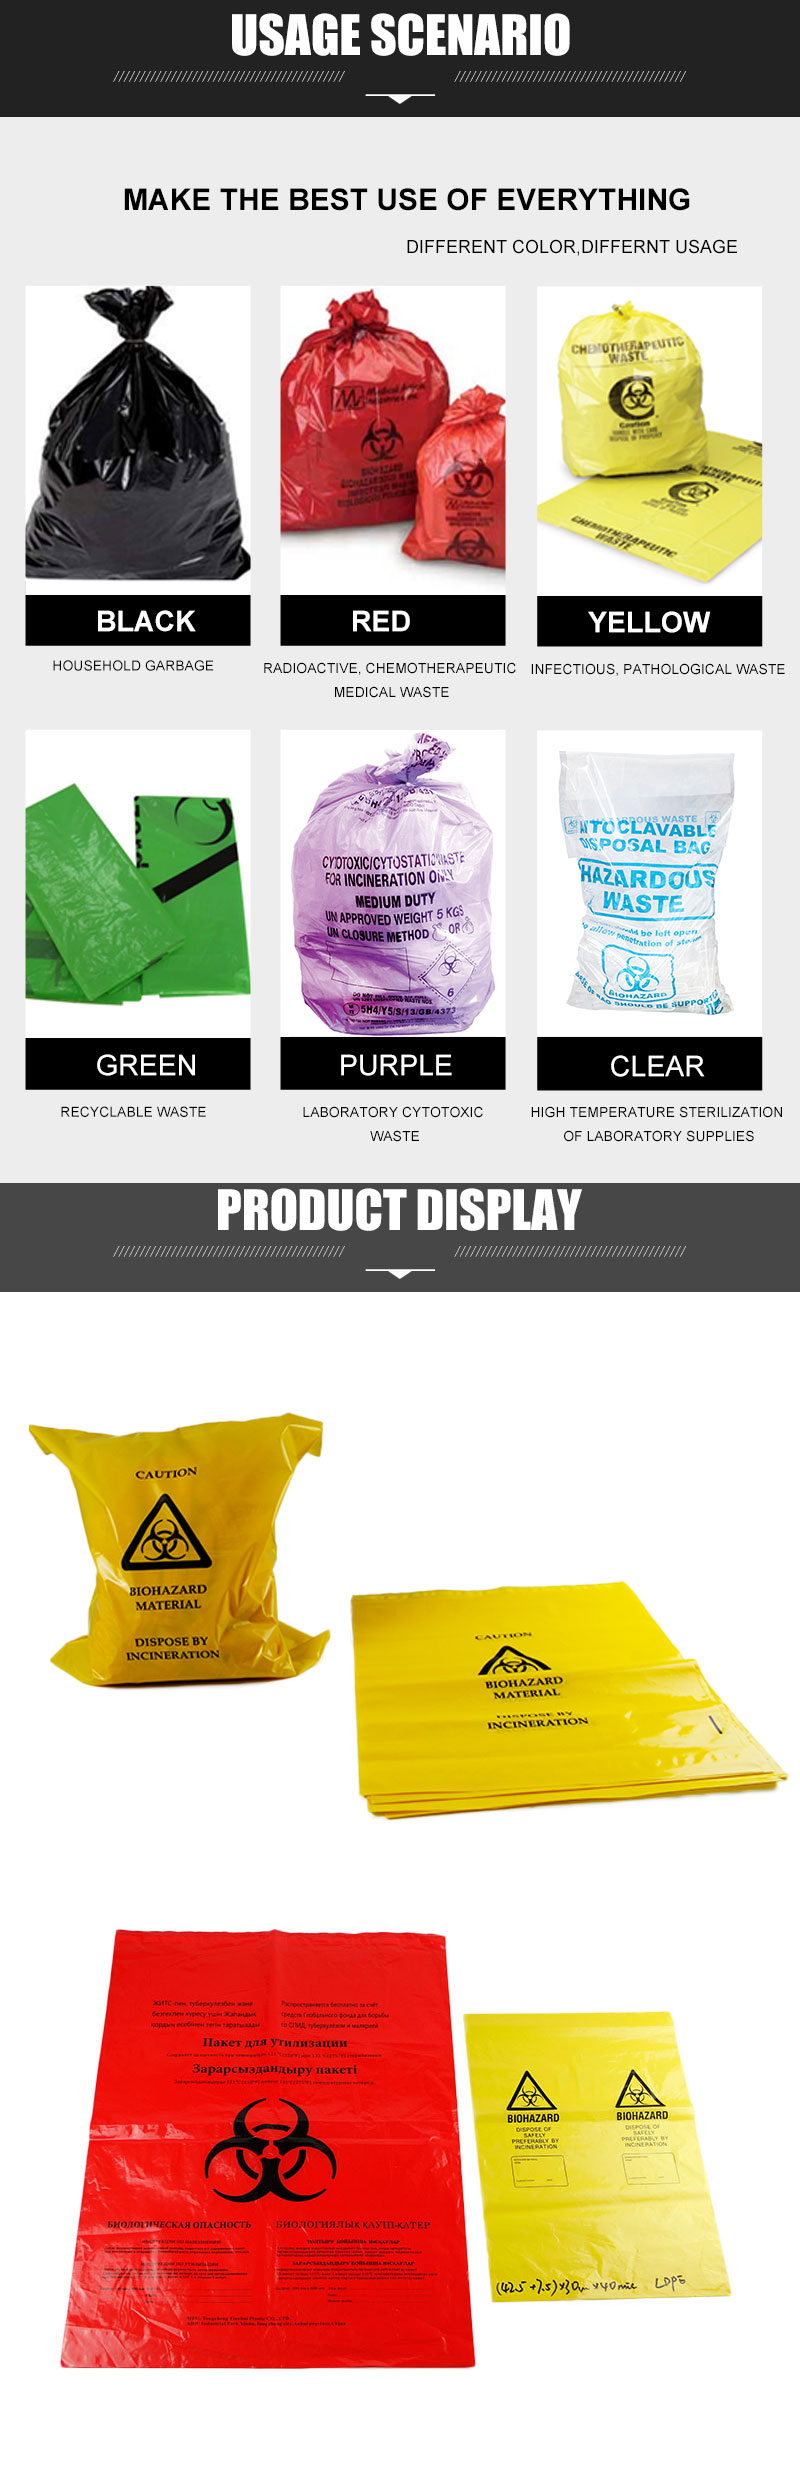 biohazard waste bags with adhesive tape